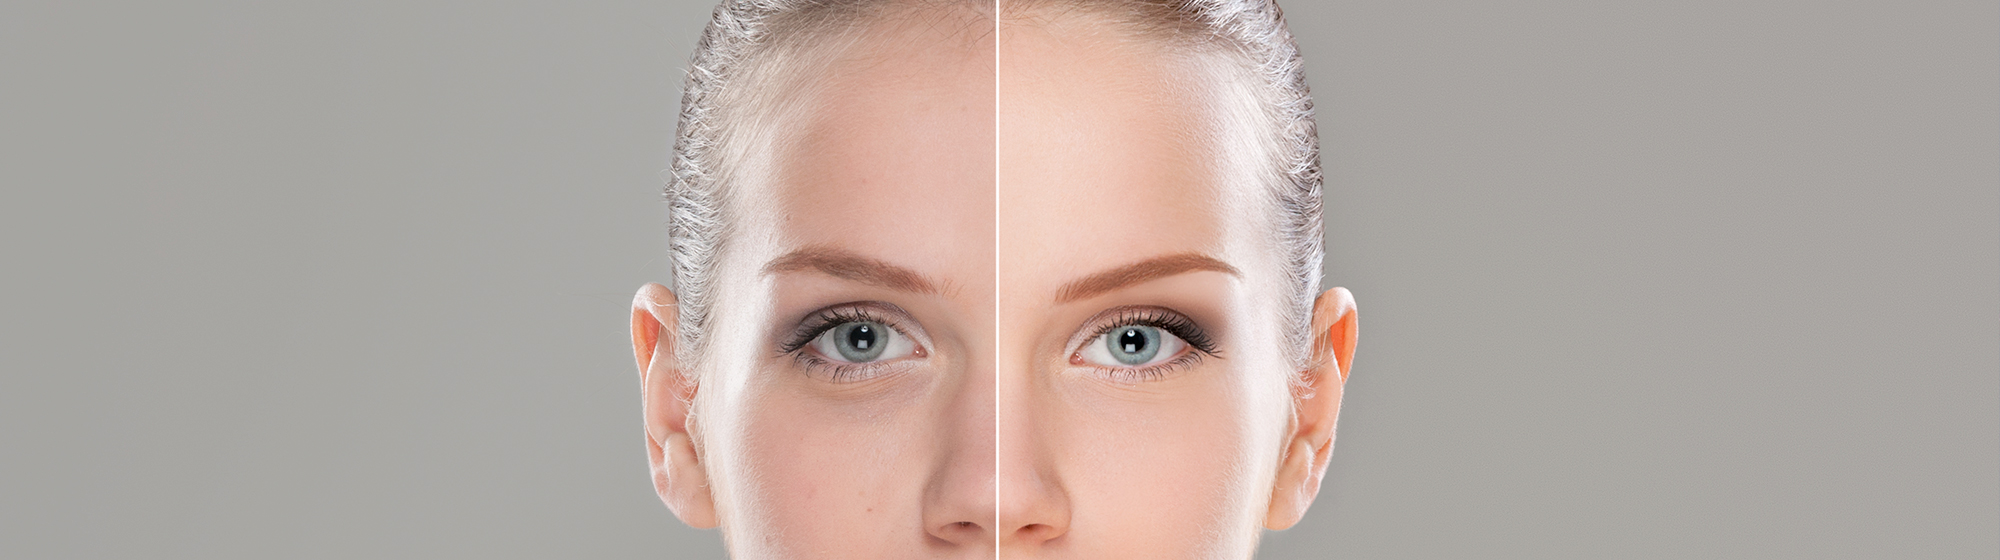 Facial Rejuvenation Before & After Photos in Tampa Bay, FL